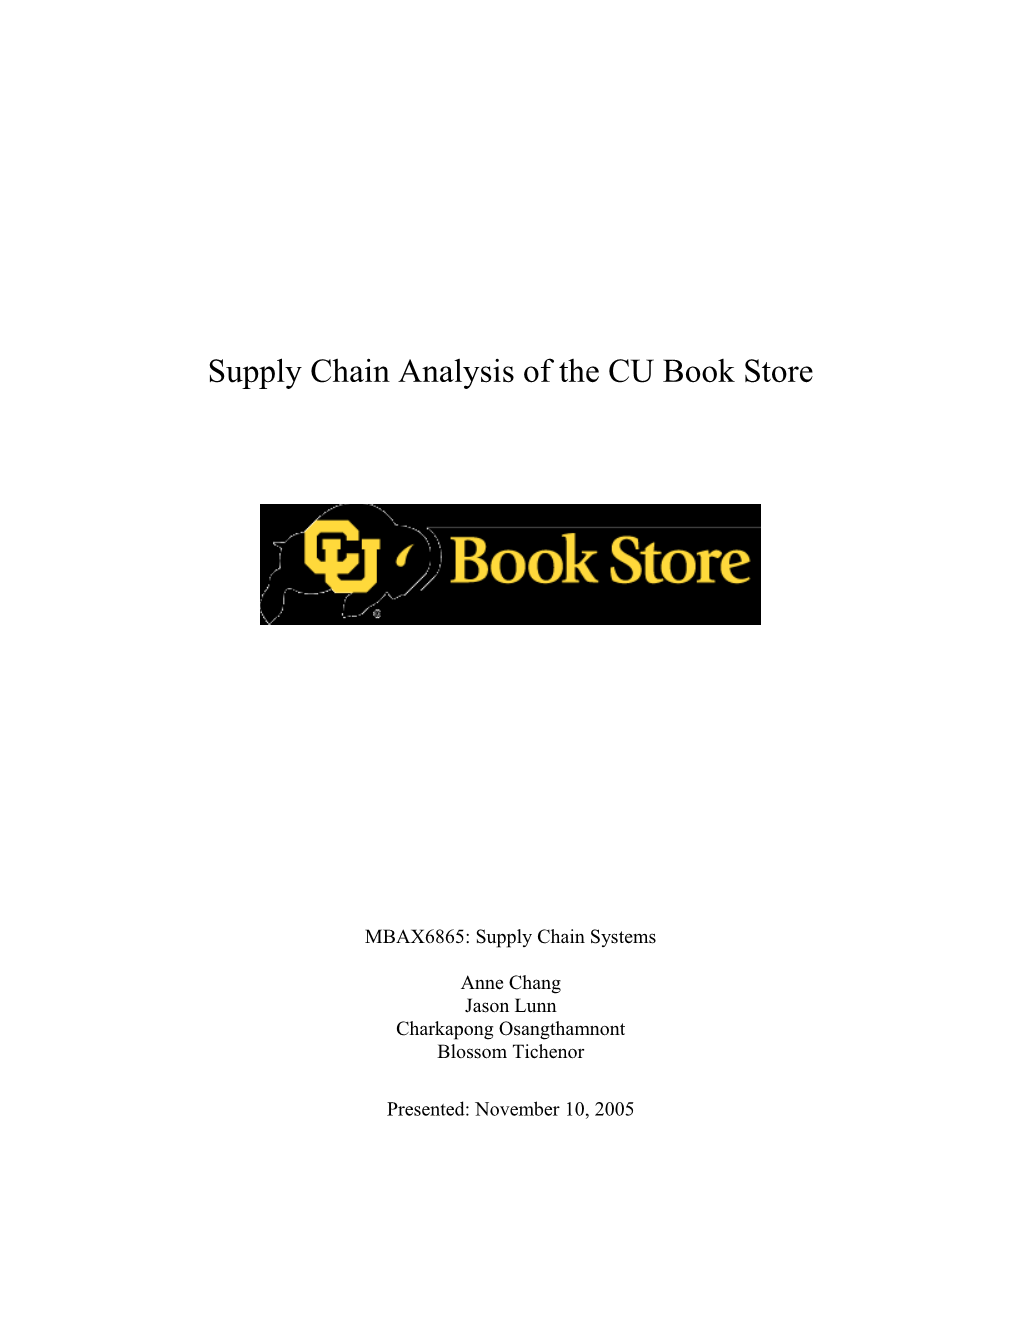 Supply Chain Analysis of the CU Book Store